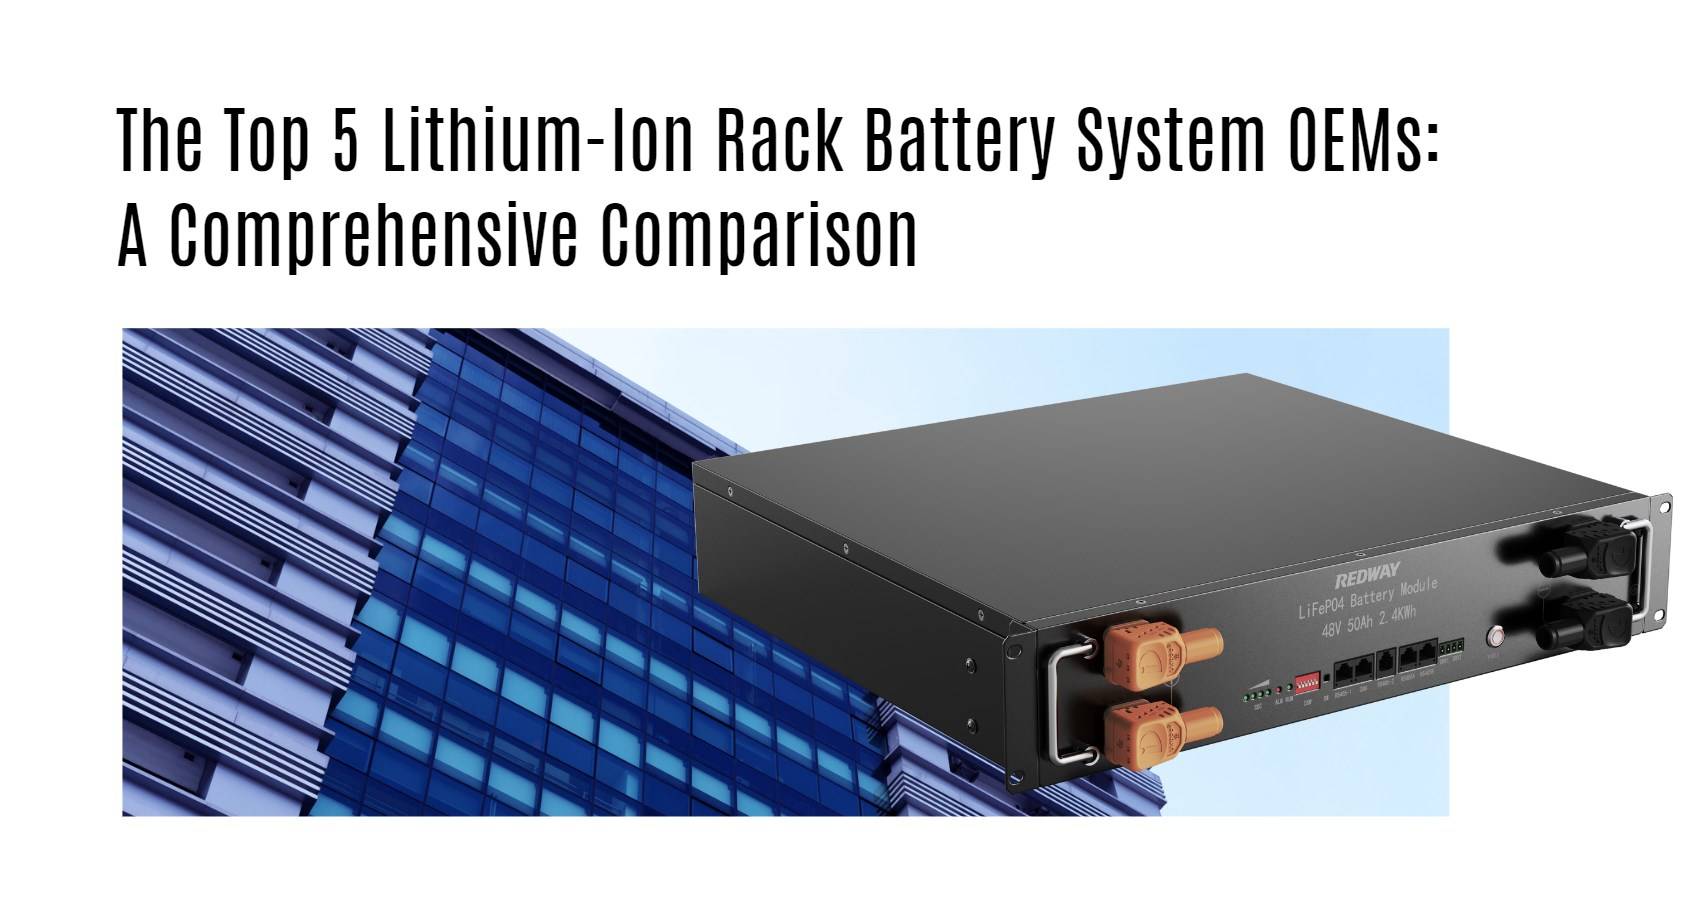 The Top 5 Lithium-Ion Rack Battery System OEMs: A Comprehensive Comparison